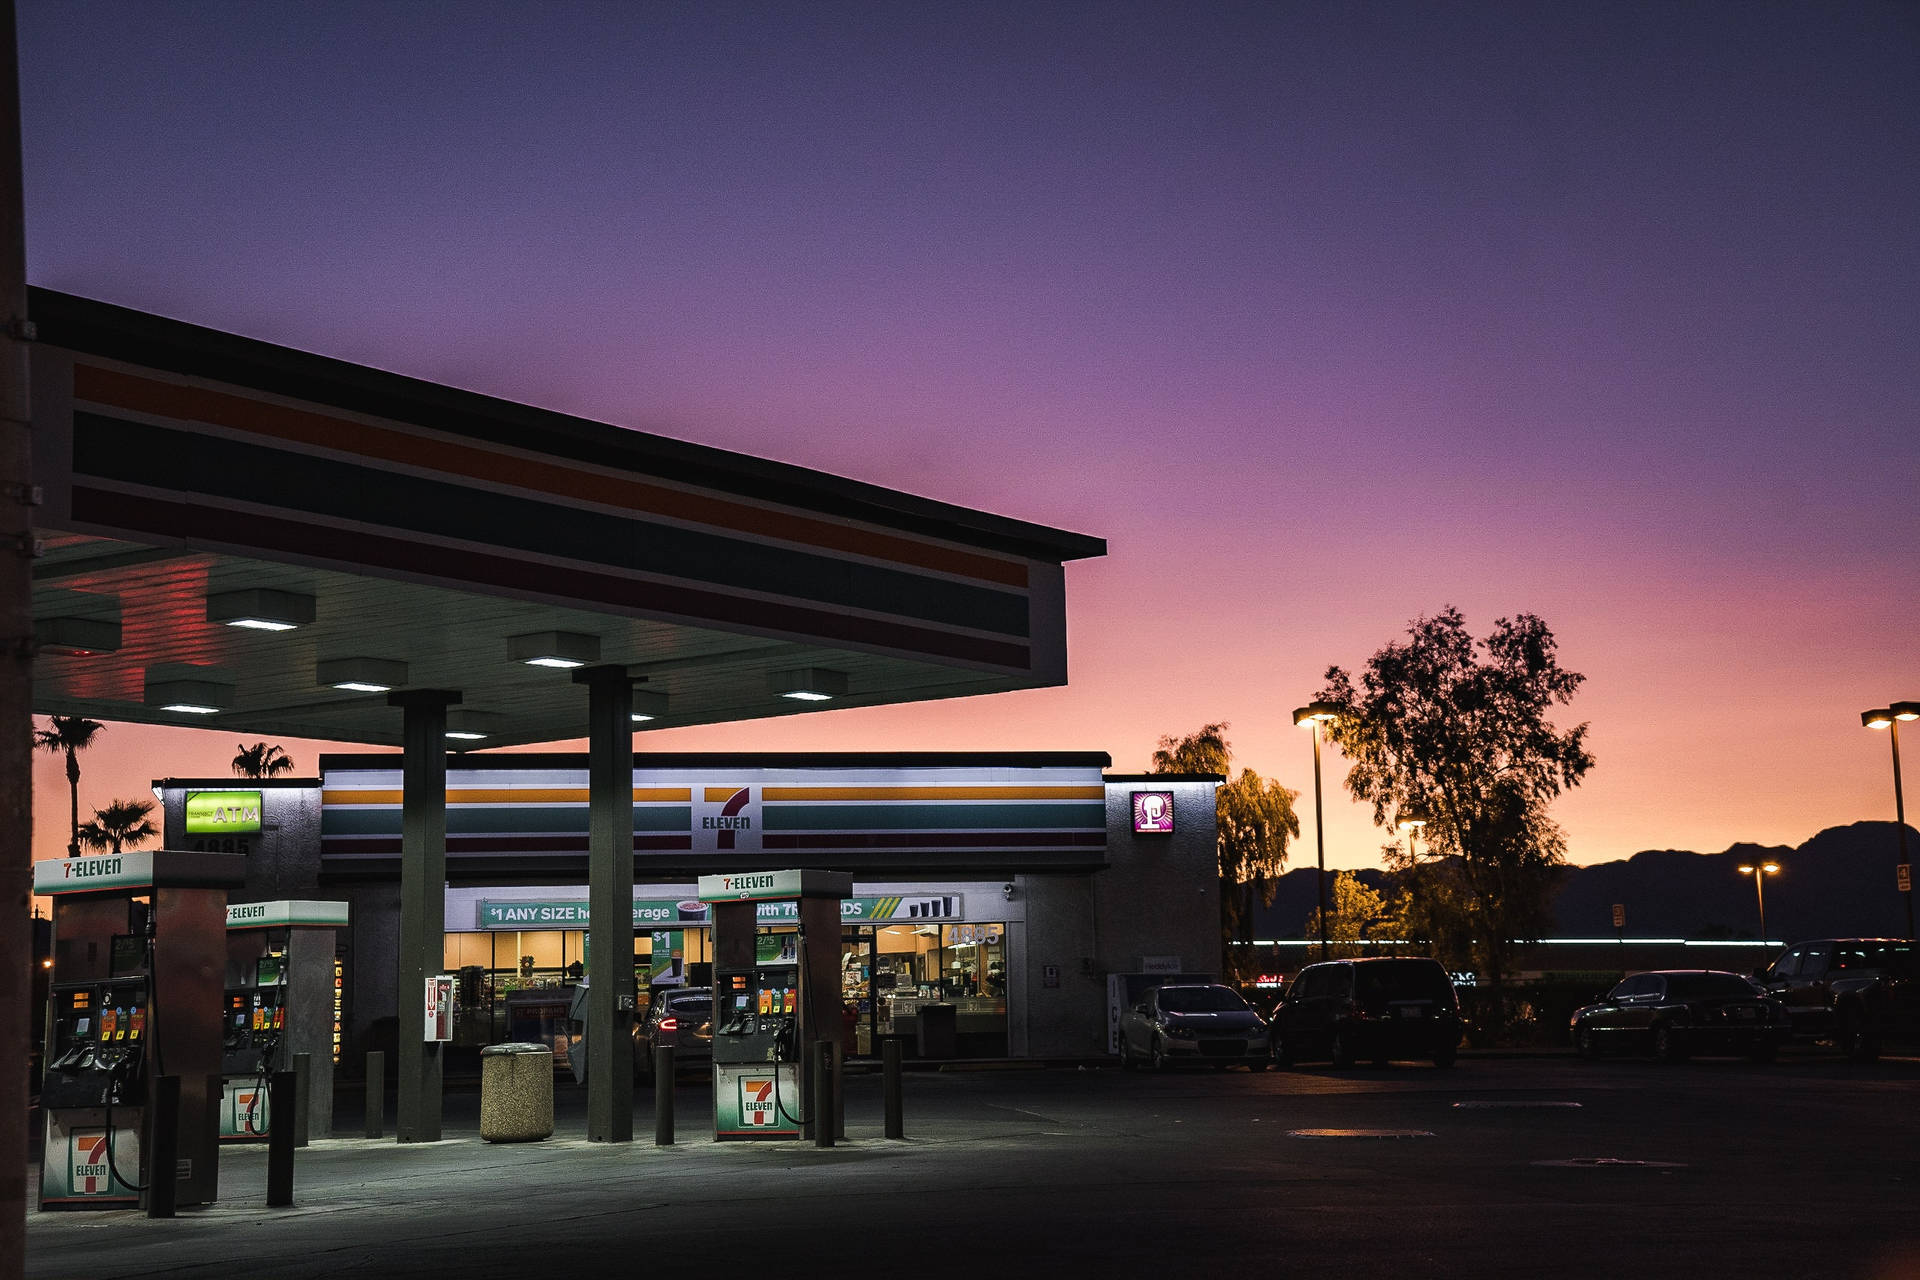 7 Eleven Store During Sunset Wallpaper